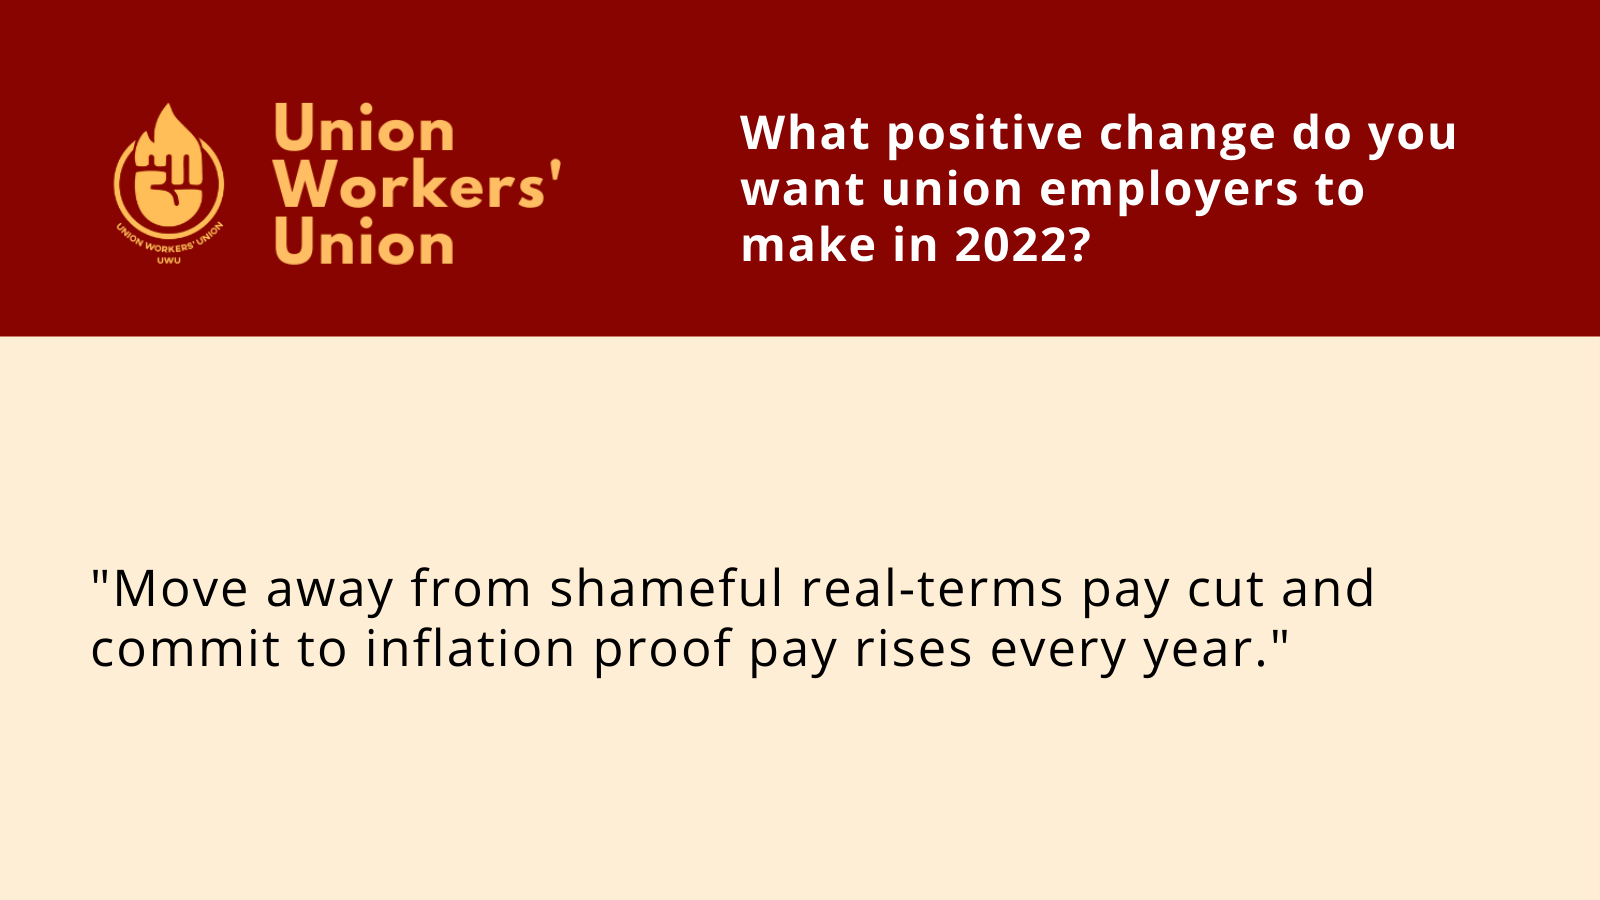 UWU logo next to question, what positive changes do you want union employers to make in 2022? Member response: Move away from shameful real-terms pay cut and commit to inflation proof pay rises every year.